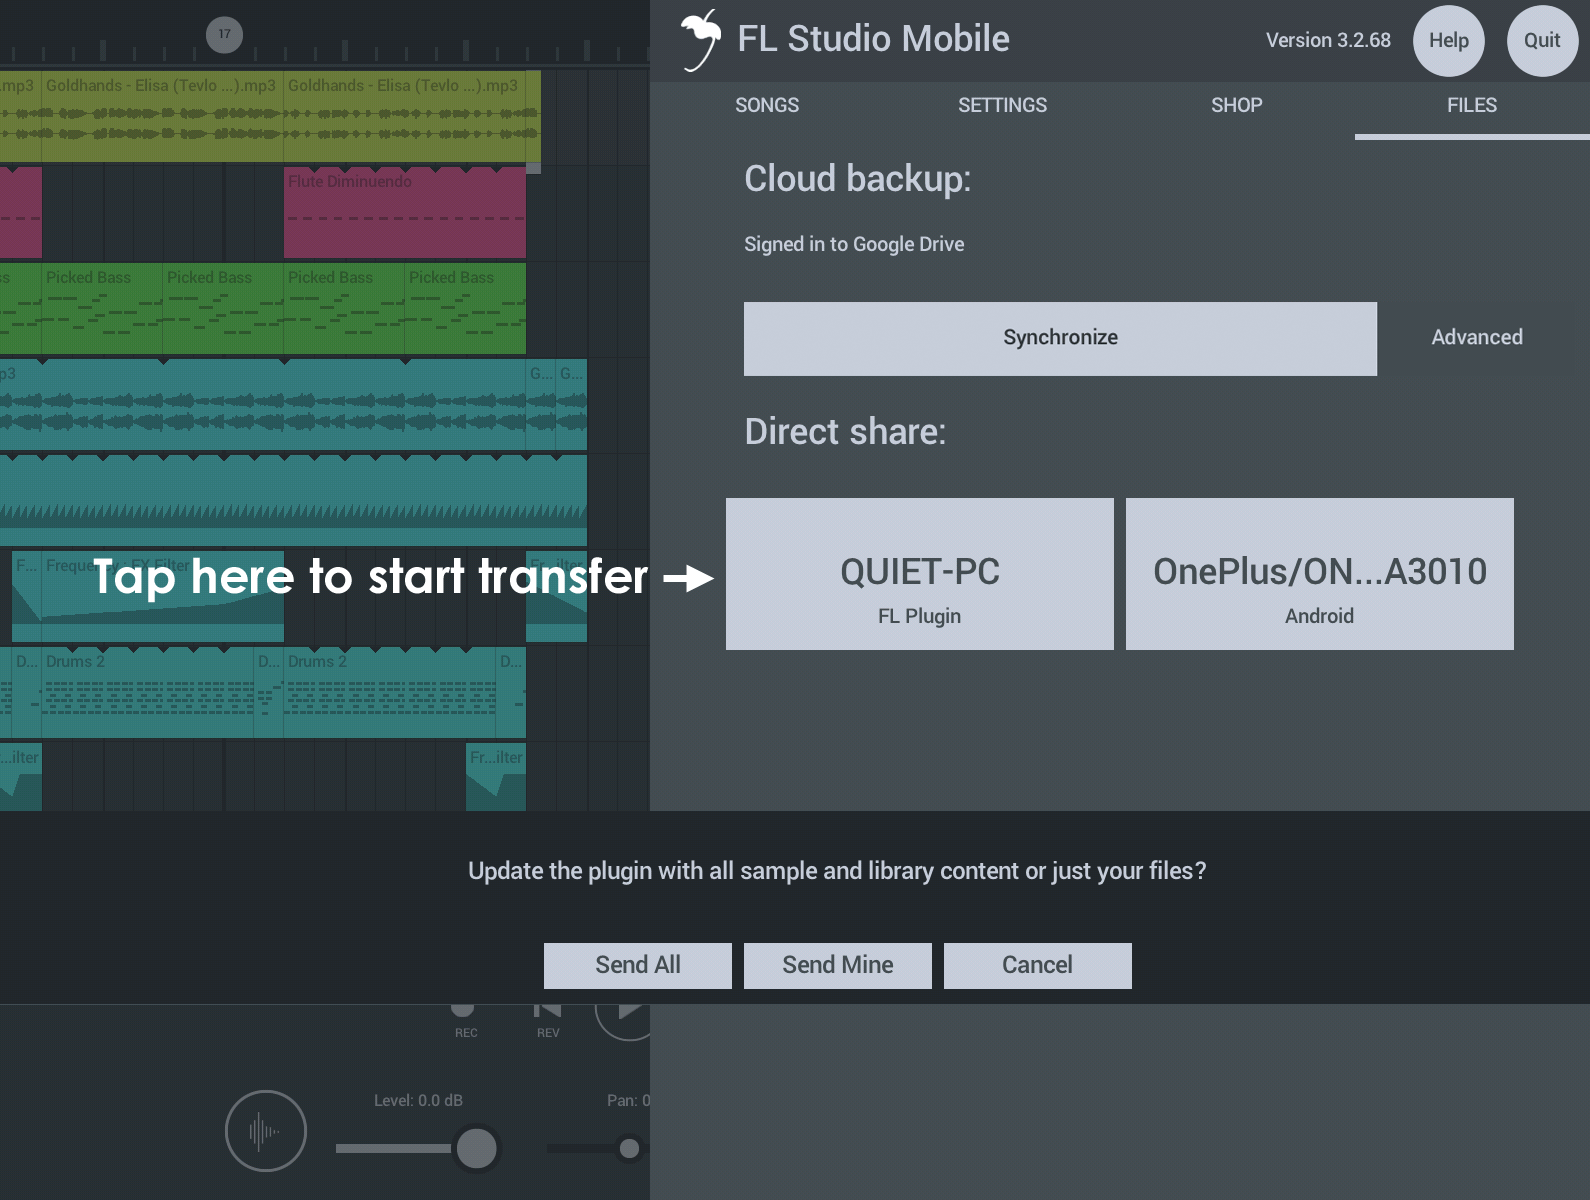 FL Studio Mobile Setting Up & Getting Started Tutorial for the